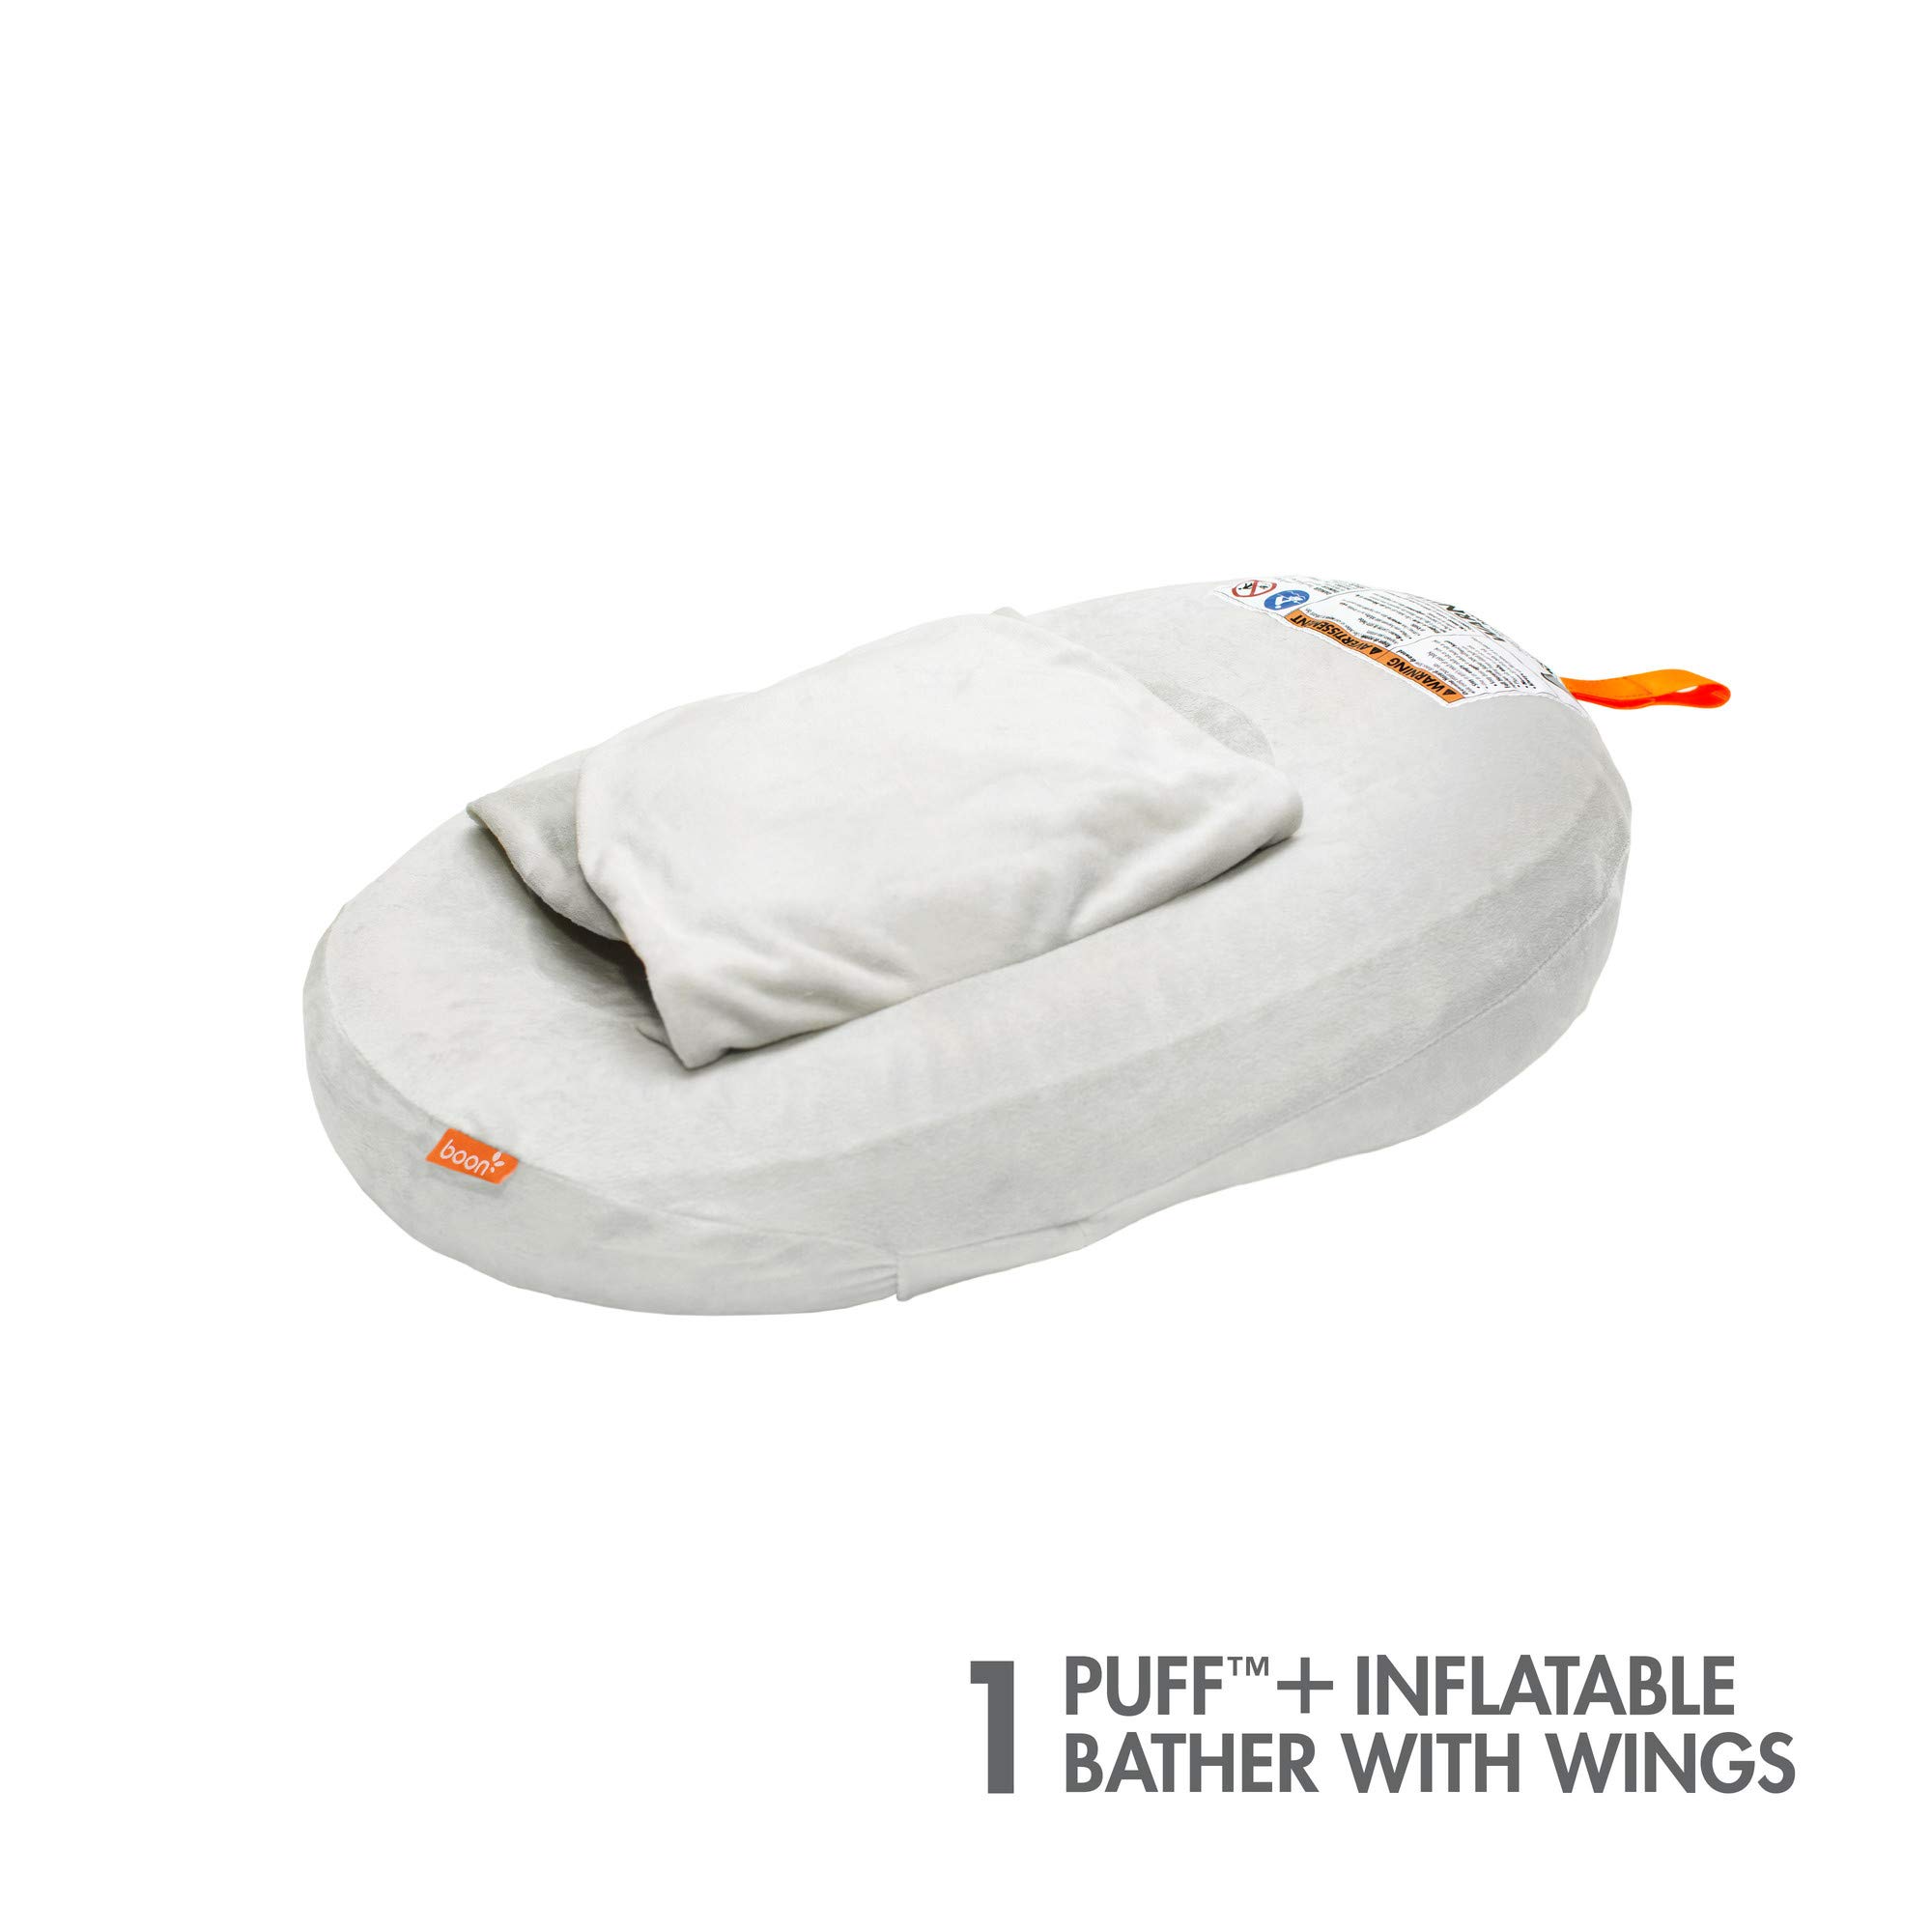 Boon Puff+ Inflatable Baby Bather with Microfleece Cover, Swaddle Wings and Storage Bag – for Newborns and Infants